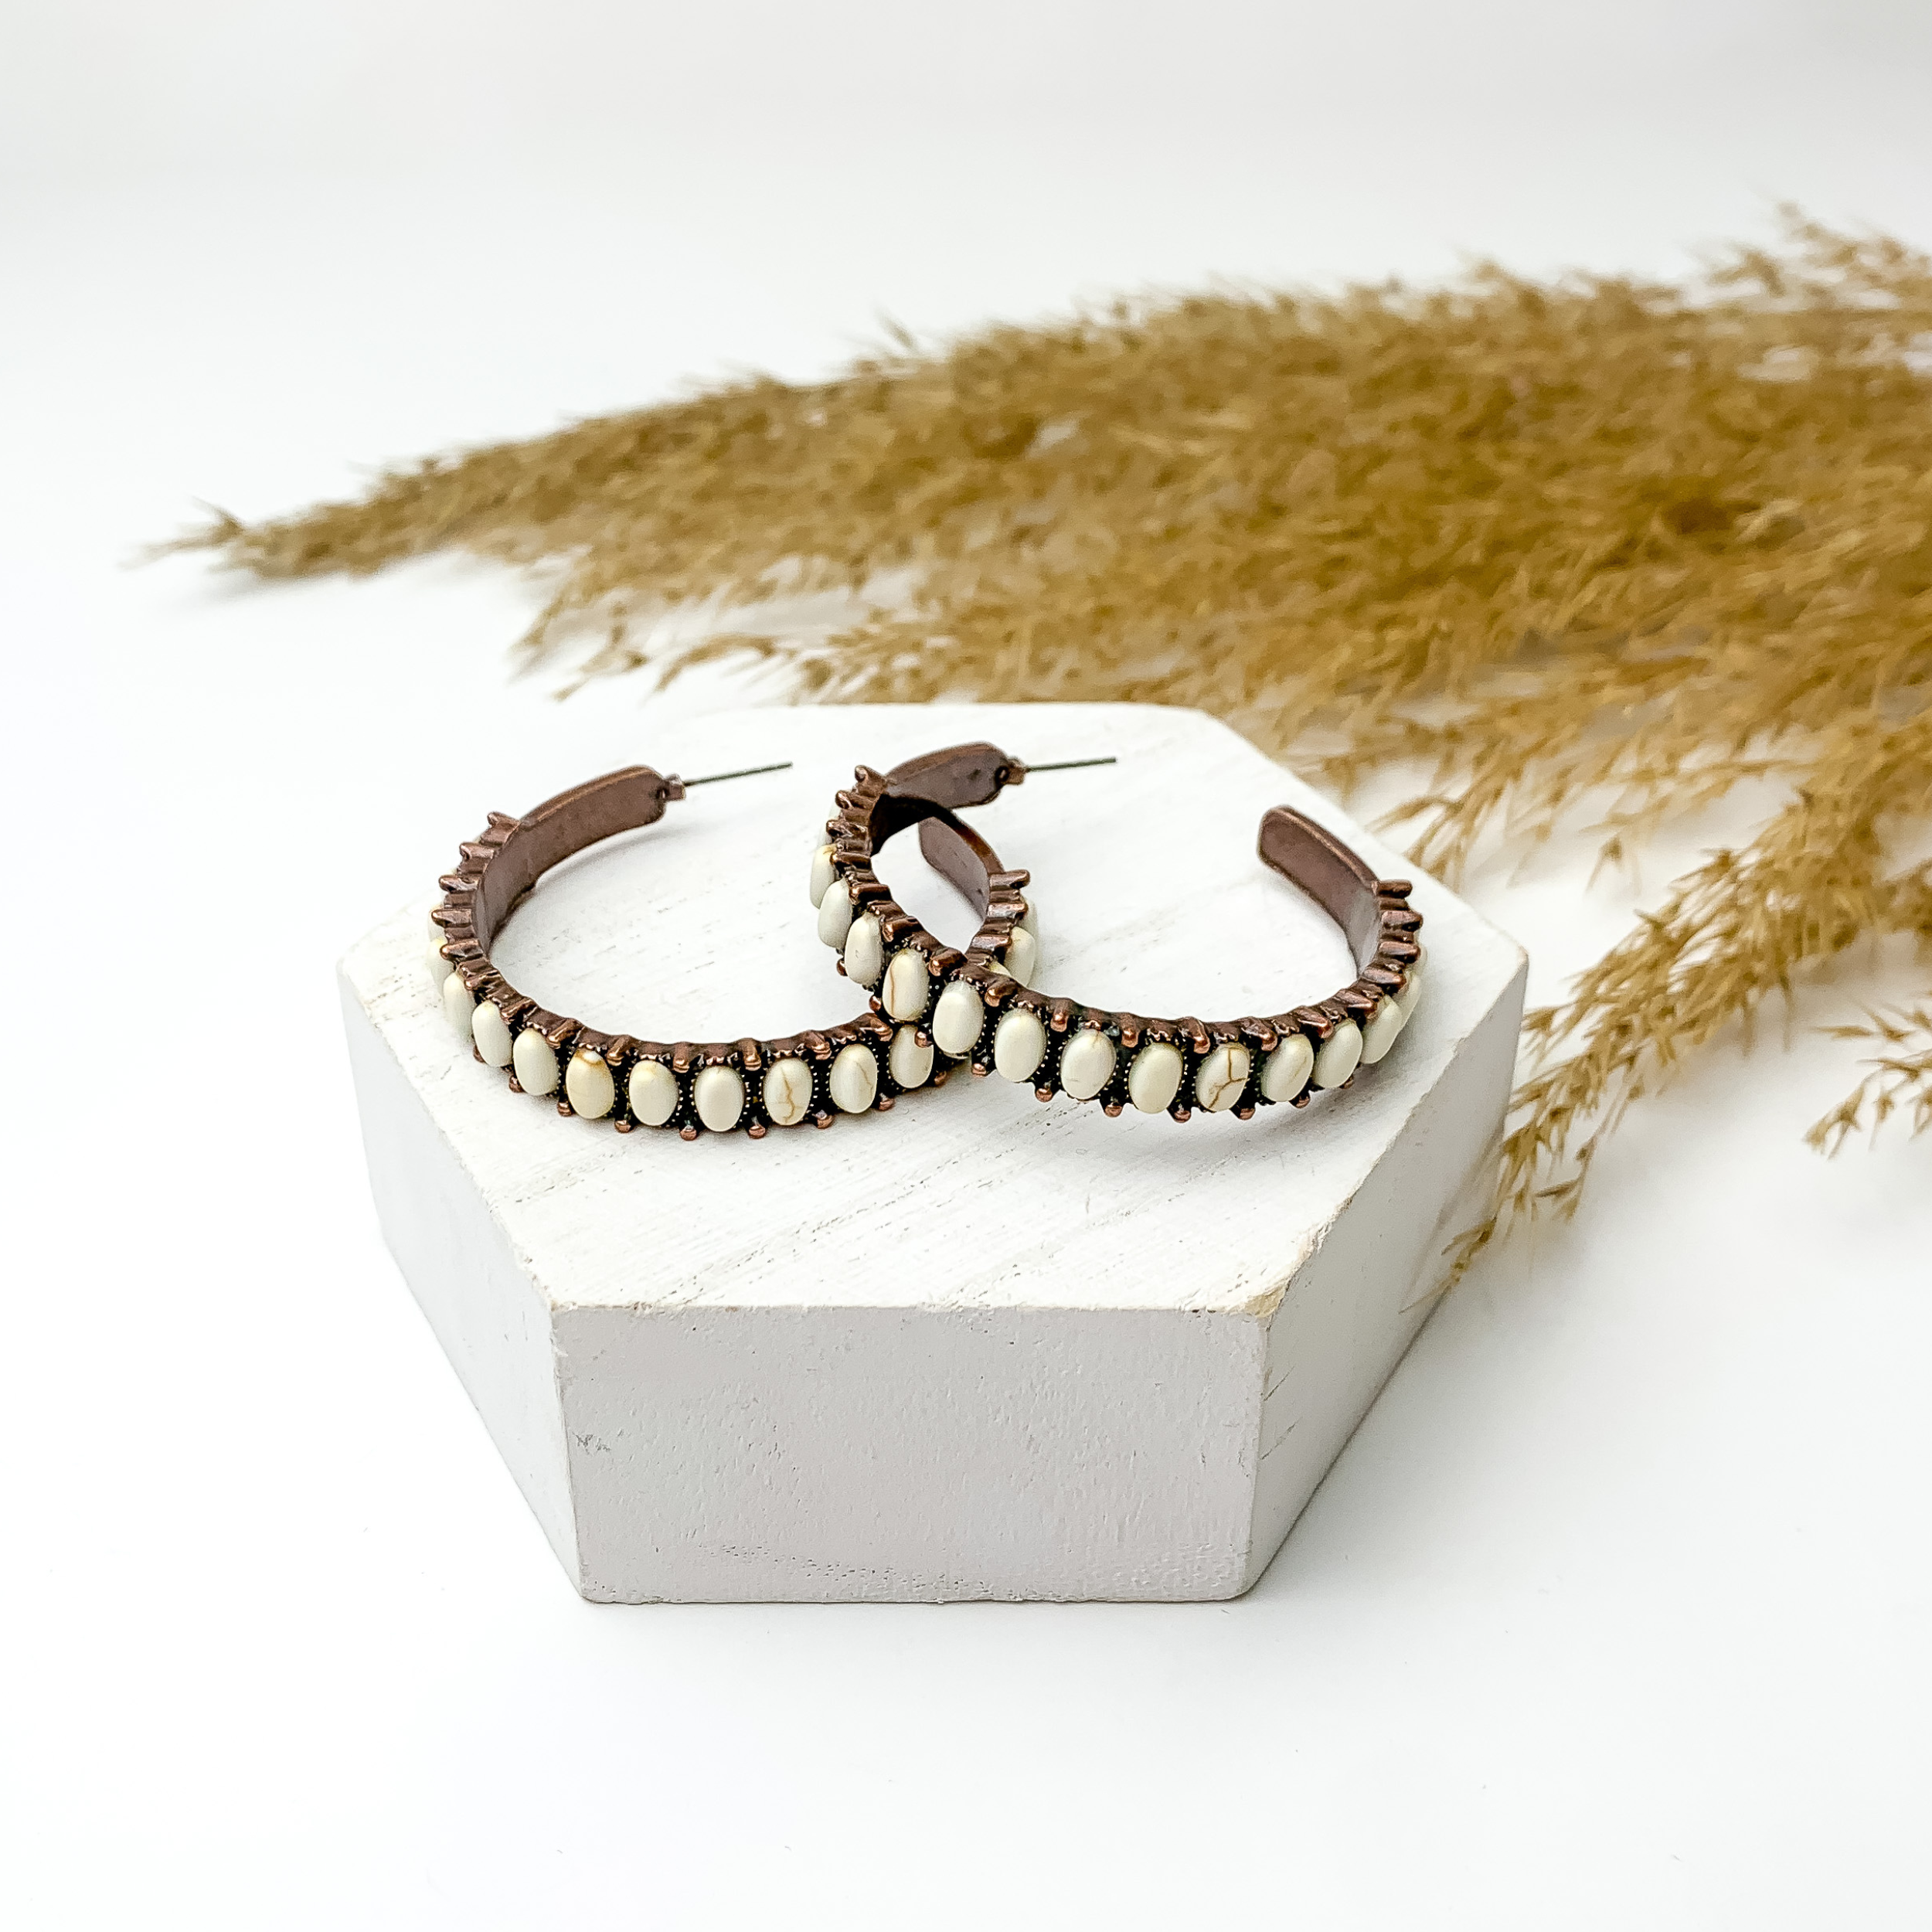 Copper tone semi hoop earrings with white stones, pictured with pampas grass on a white background. 